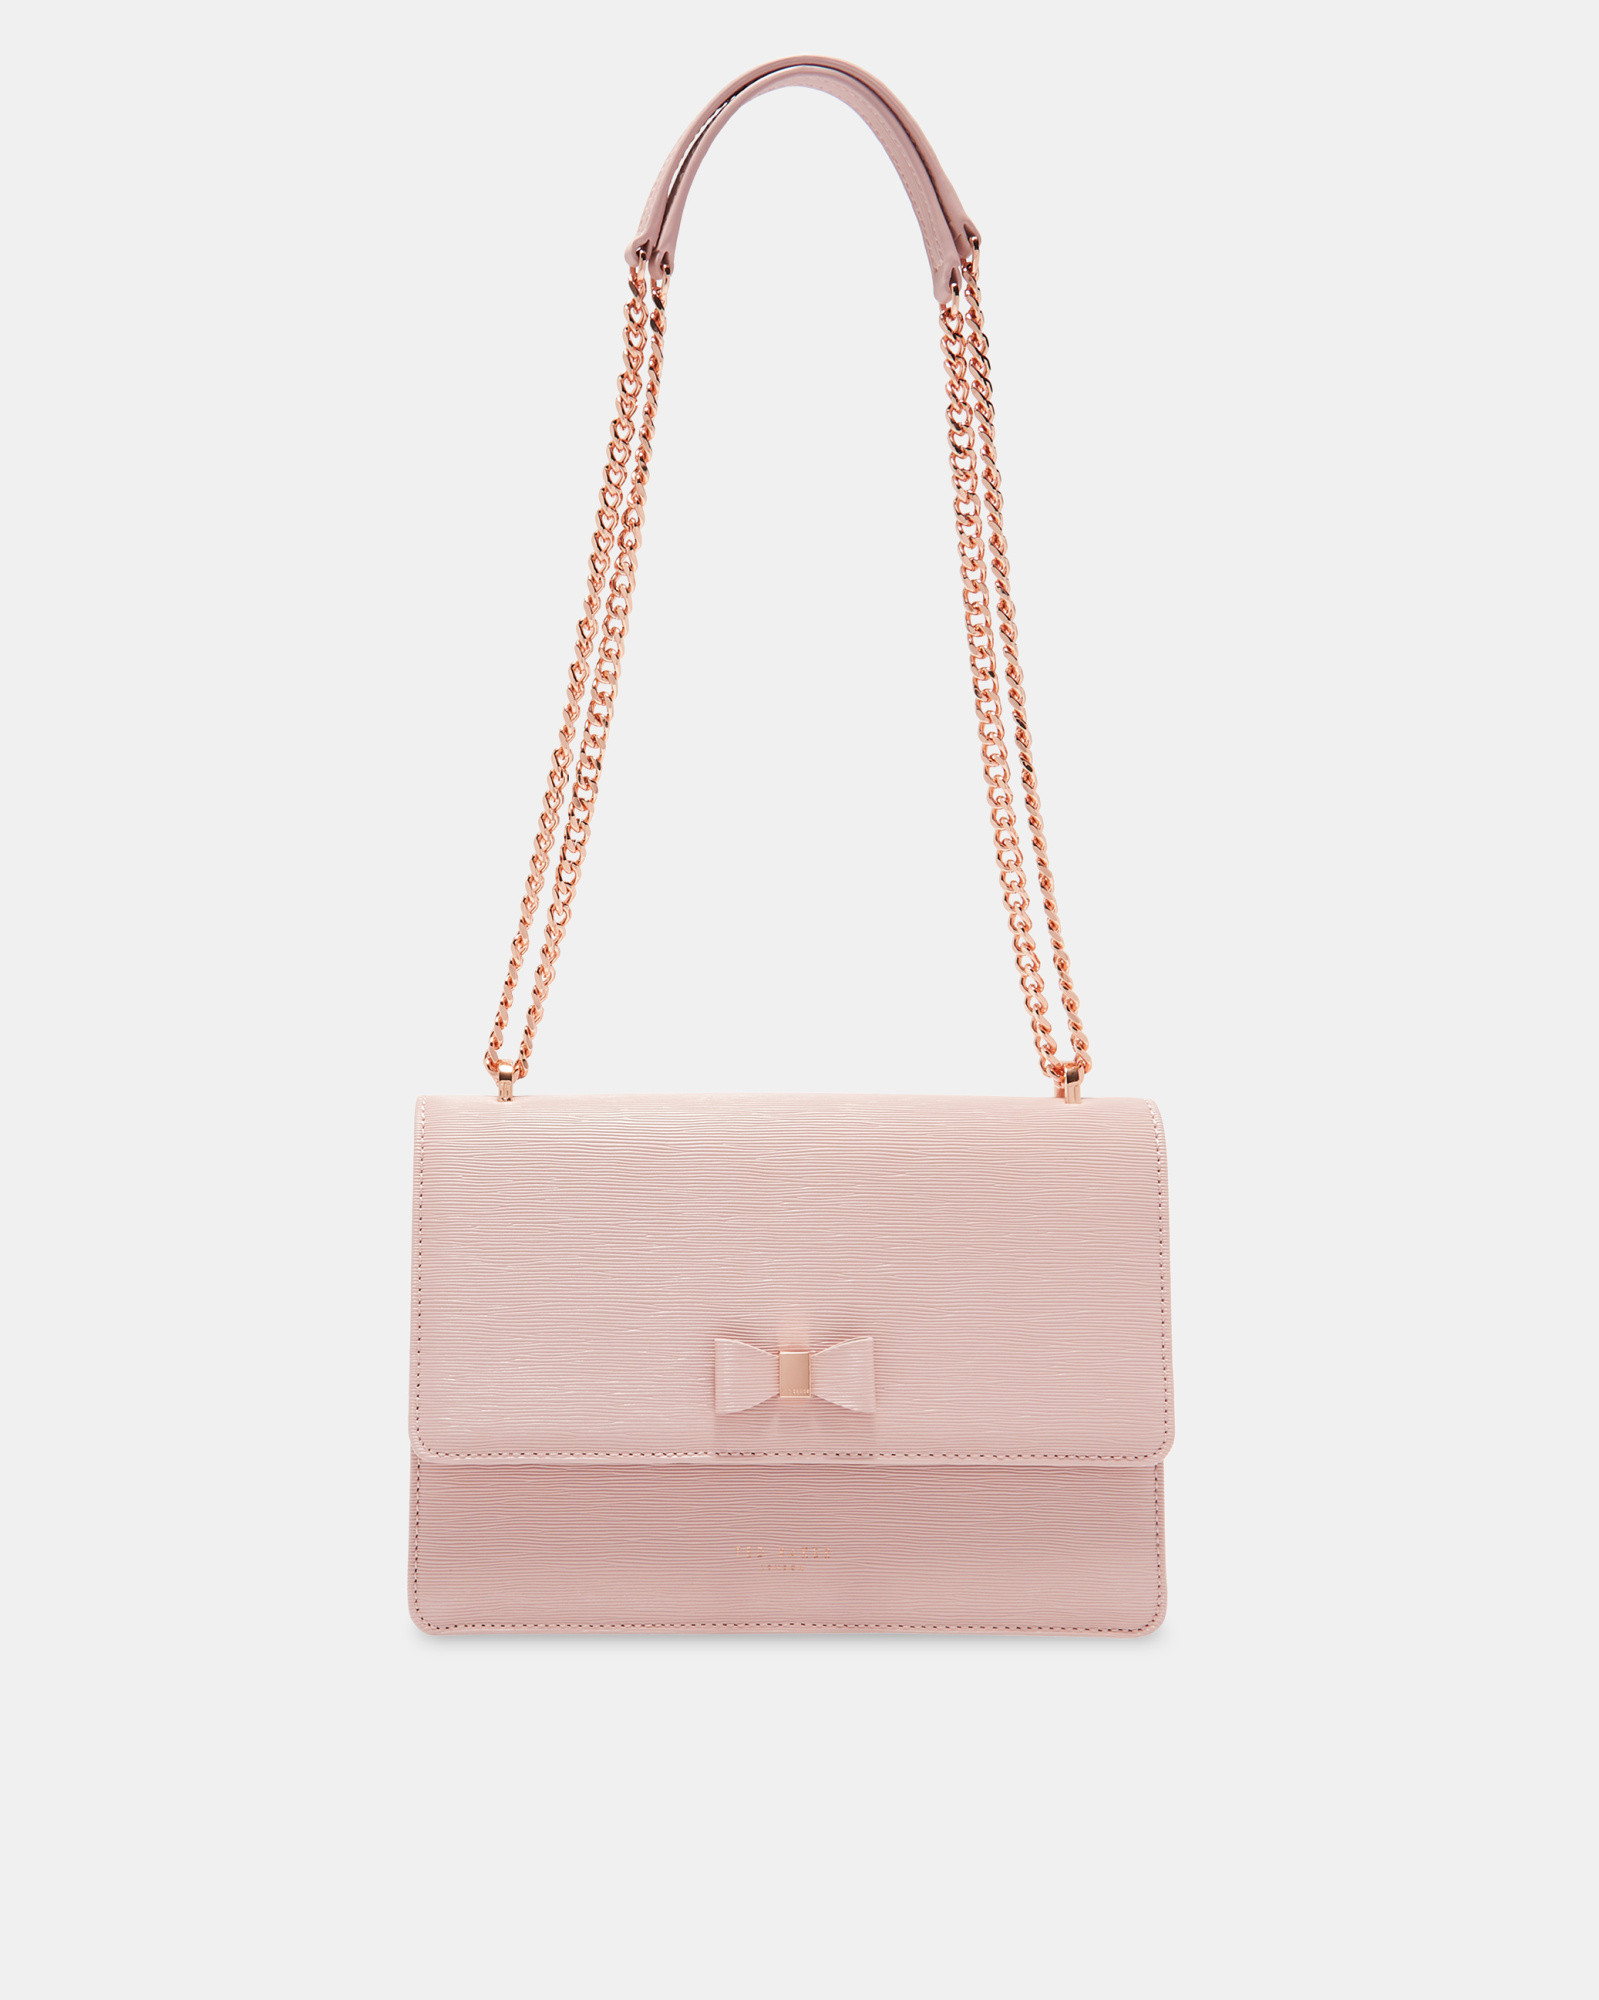 DELILA Bow detail leather cross body bag